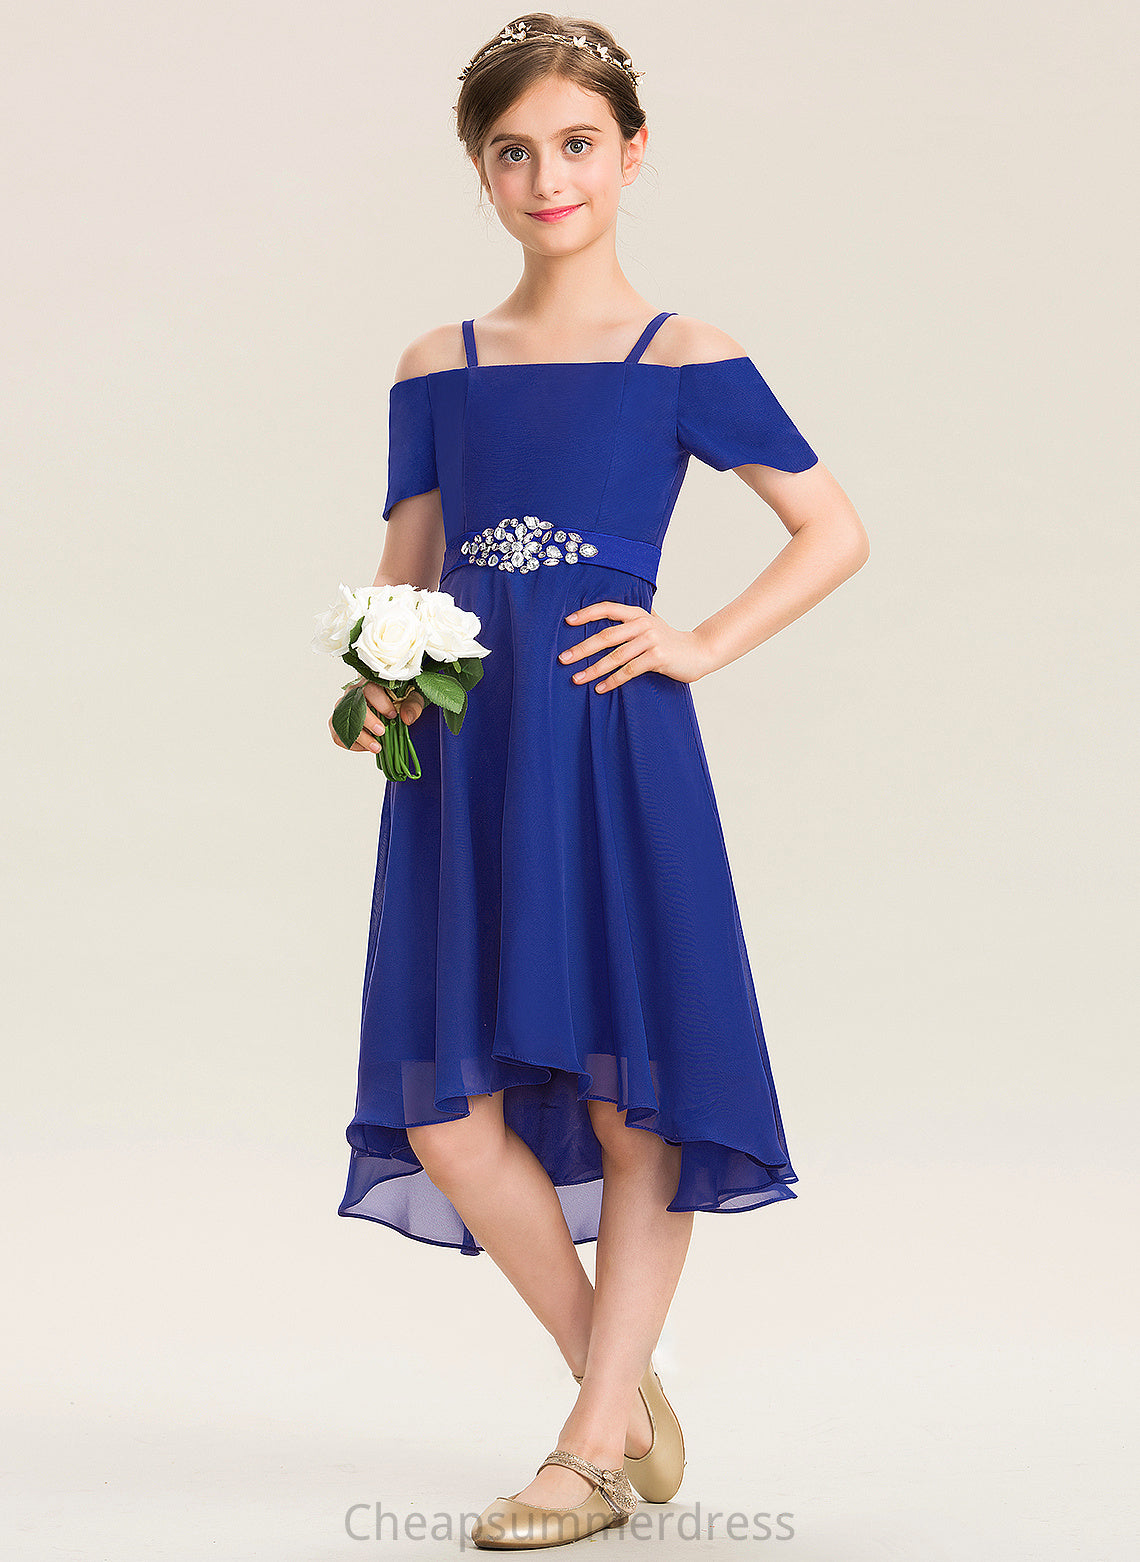 Asymmetrical Junior Bridesmaid Dresses Beading Kayley A-Line Chiffon Off-the-Shoulder With Bow(s)